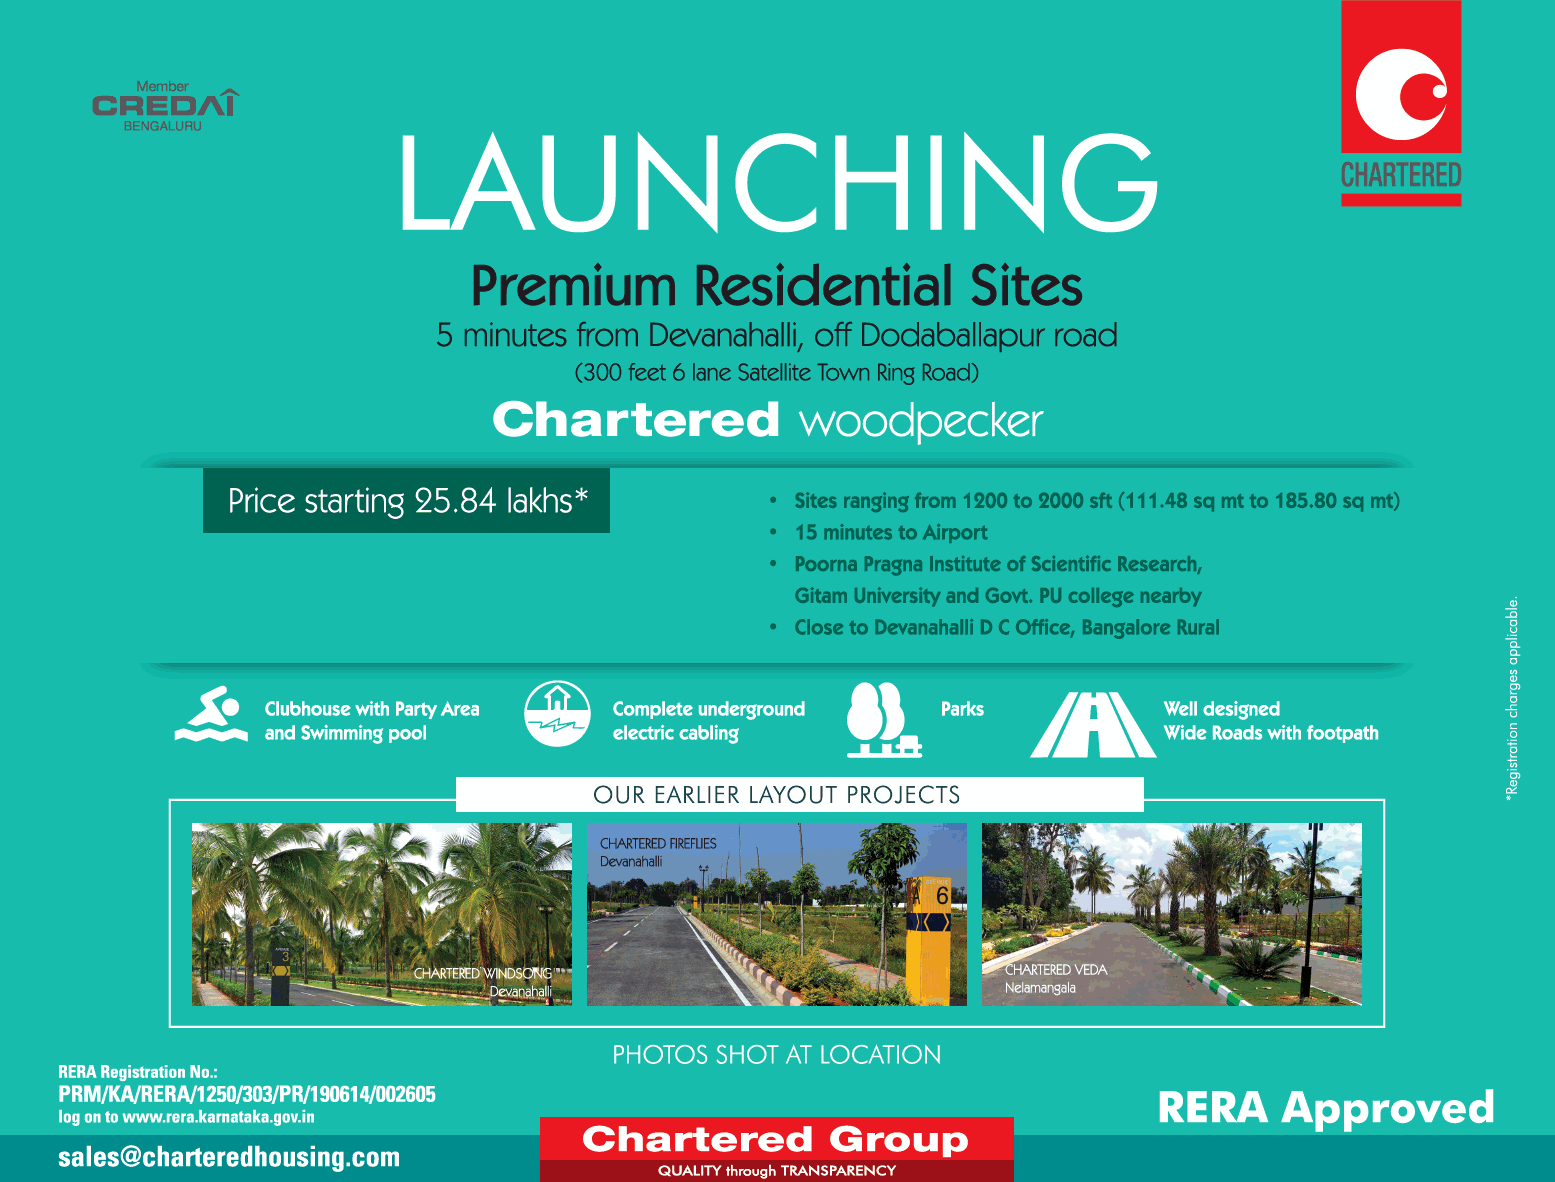 Chartered Woodpecker launching premium residential site in Bangalore